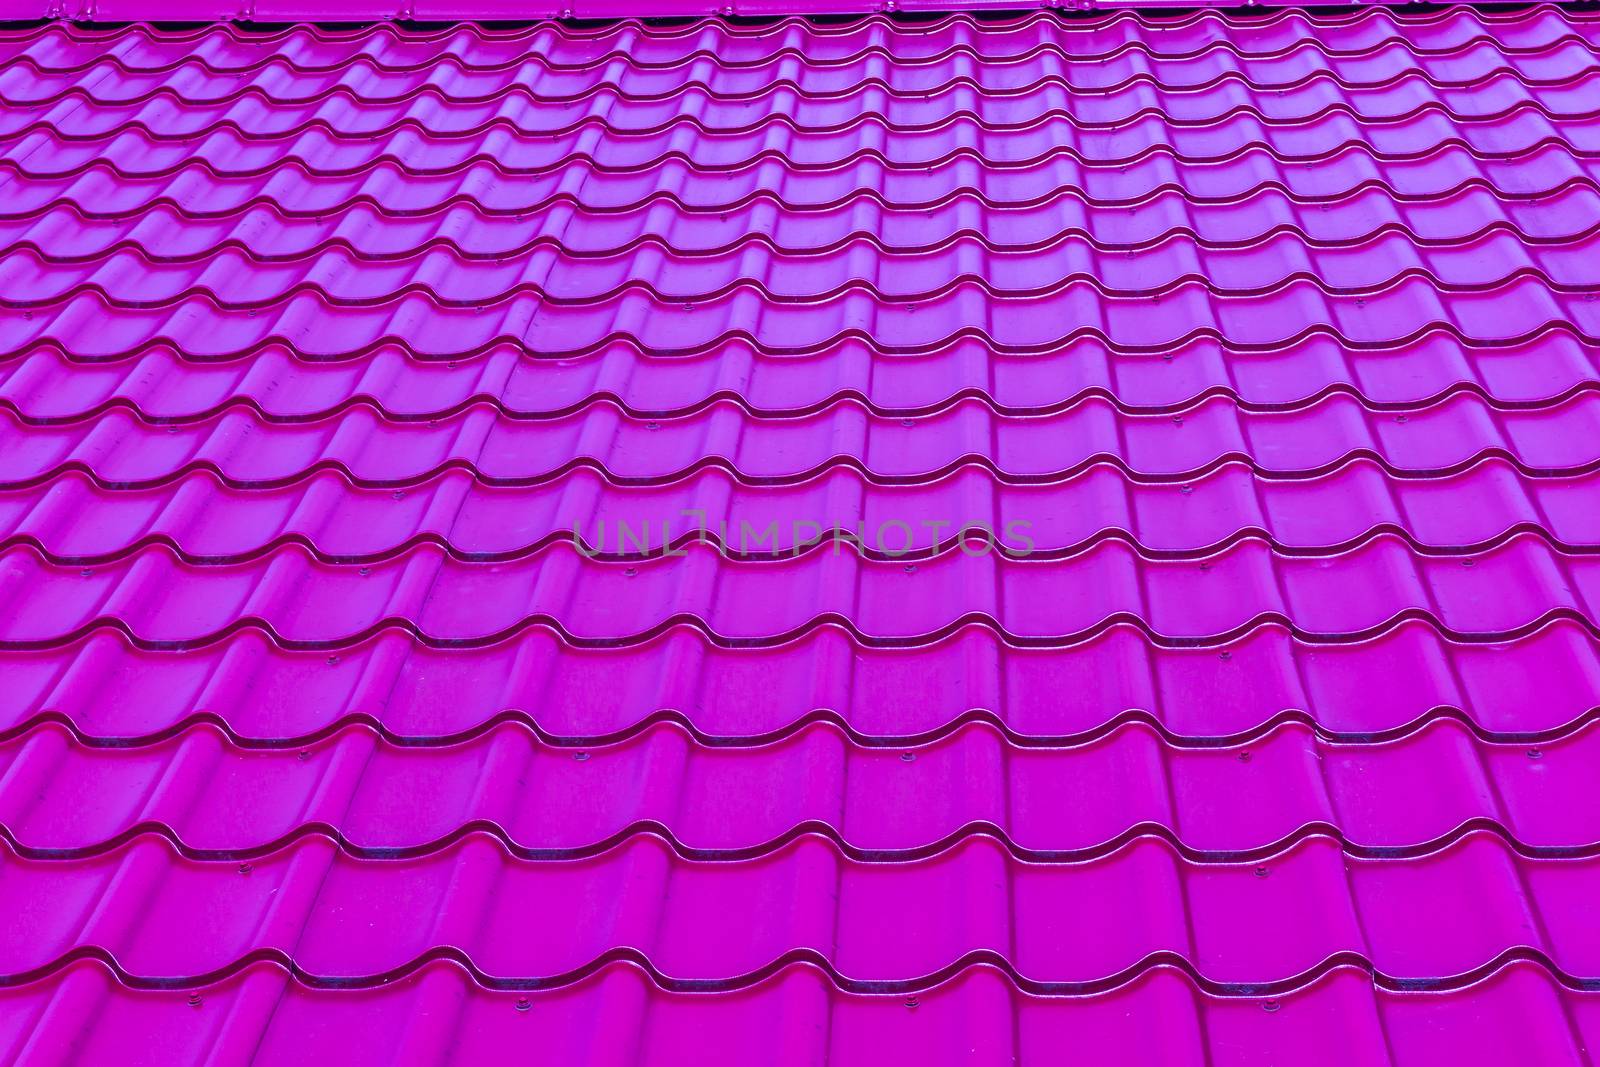 modern bright deep neon purple glossy rooftop tiling texture background